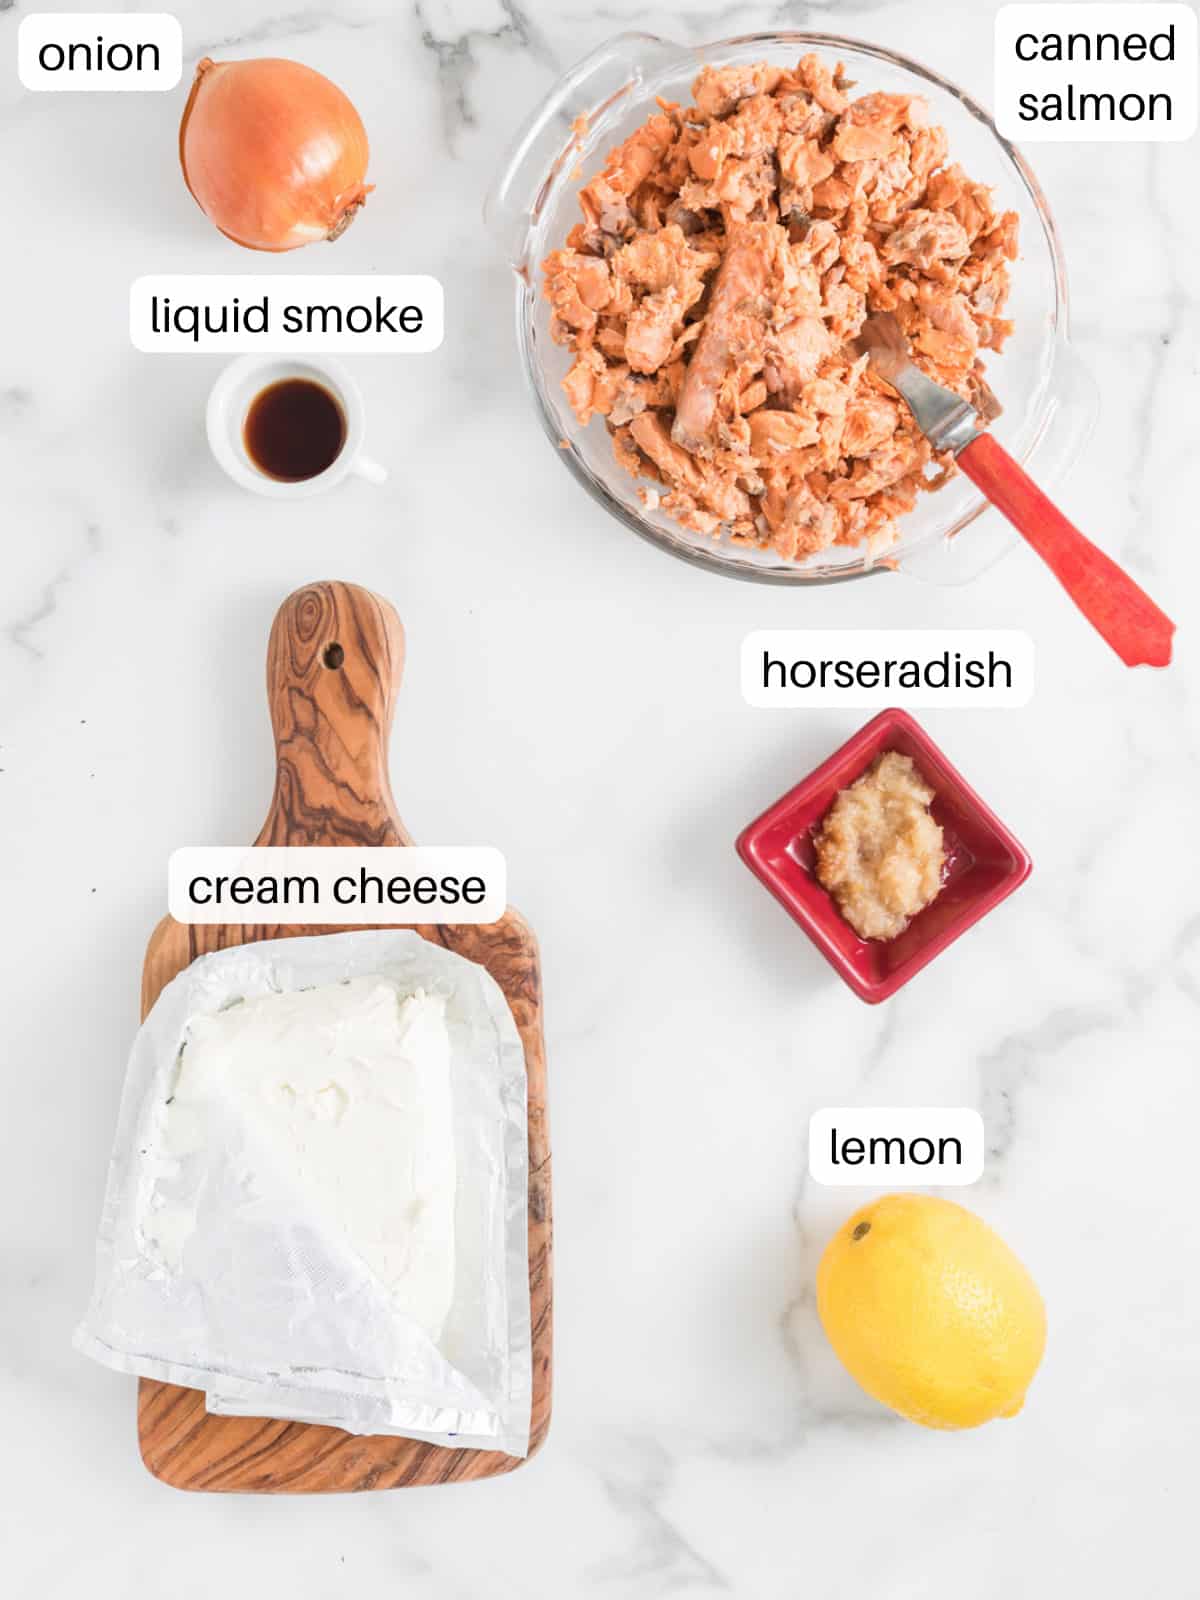 Ingredients for salmon mousse in small containers including canned salmon, cream cheese, and onion.